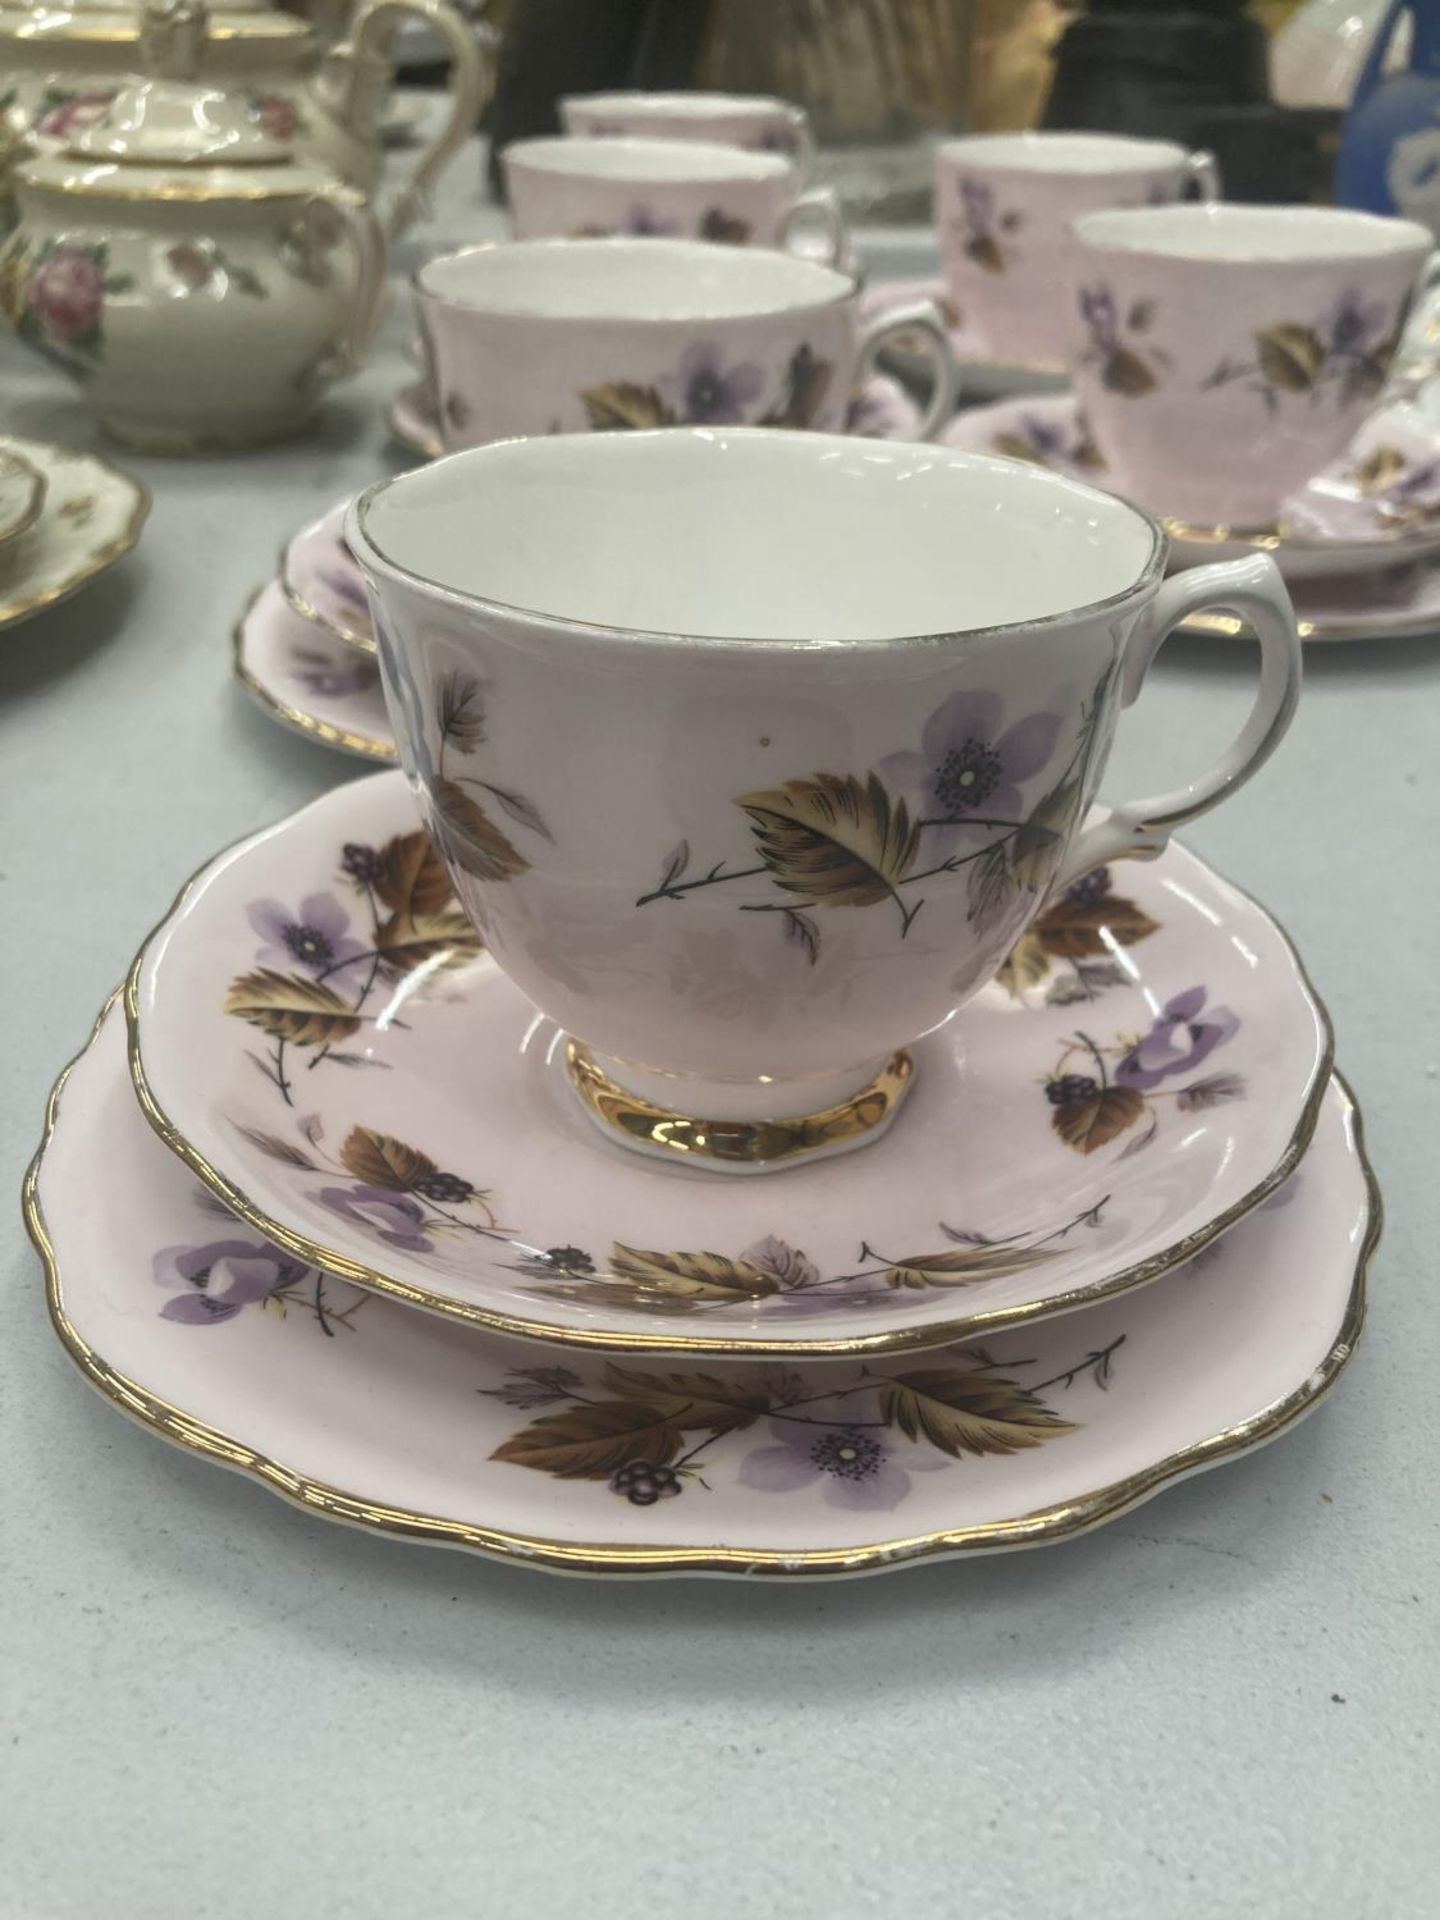 FIVE COLCLOUGH TRIOS IN LILAC WITH BLACKBERRY PATTERN PLUS A CUP AND SAUCER - Image 2 of 4